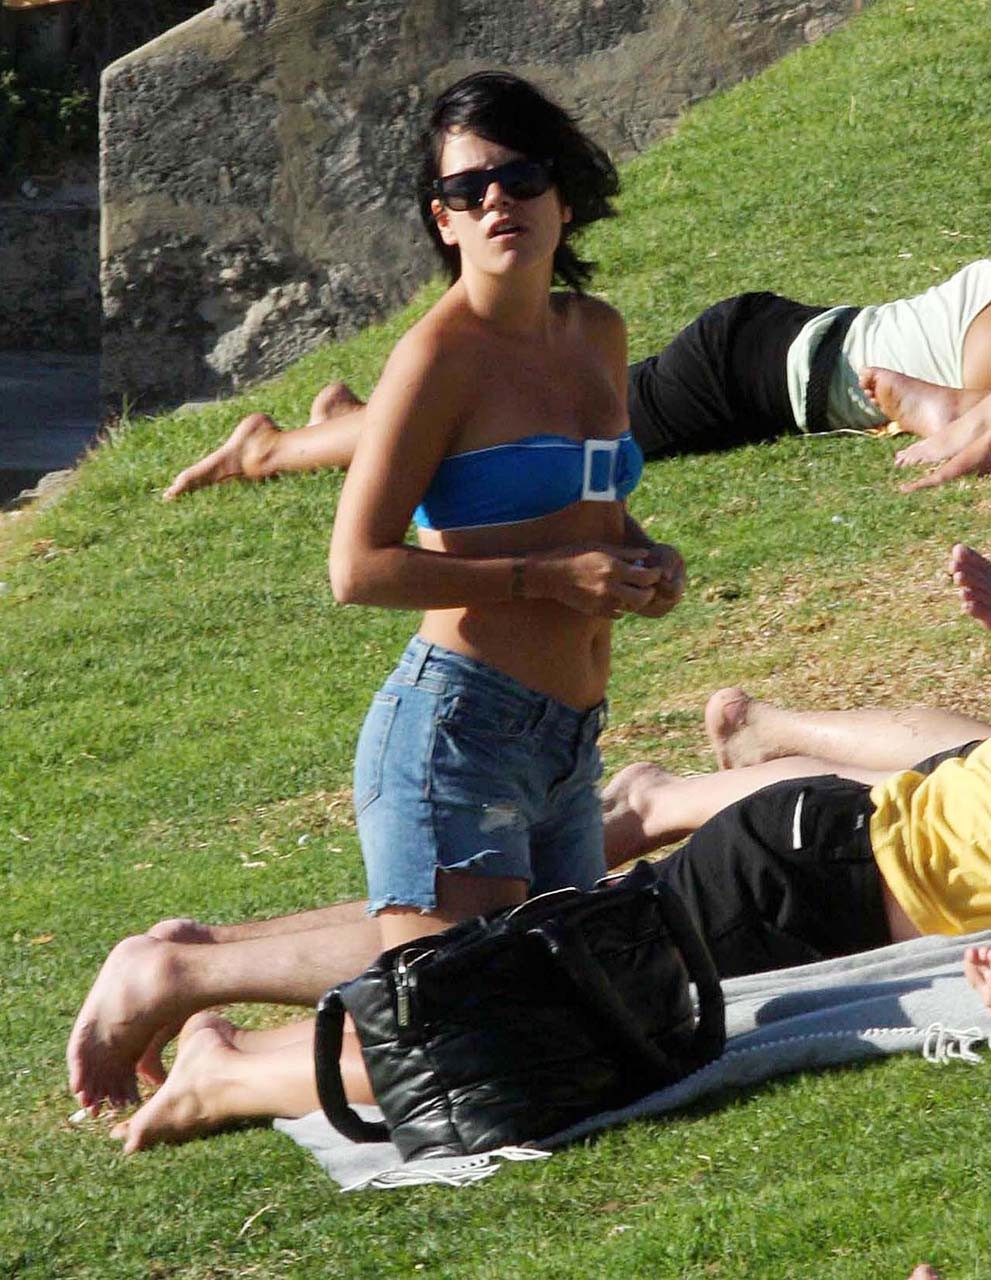 Lily Allen nipple slip and exposing her nice boobs on beach paparazzi pictures #75307148